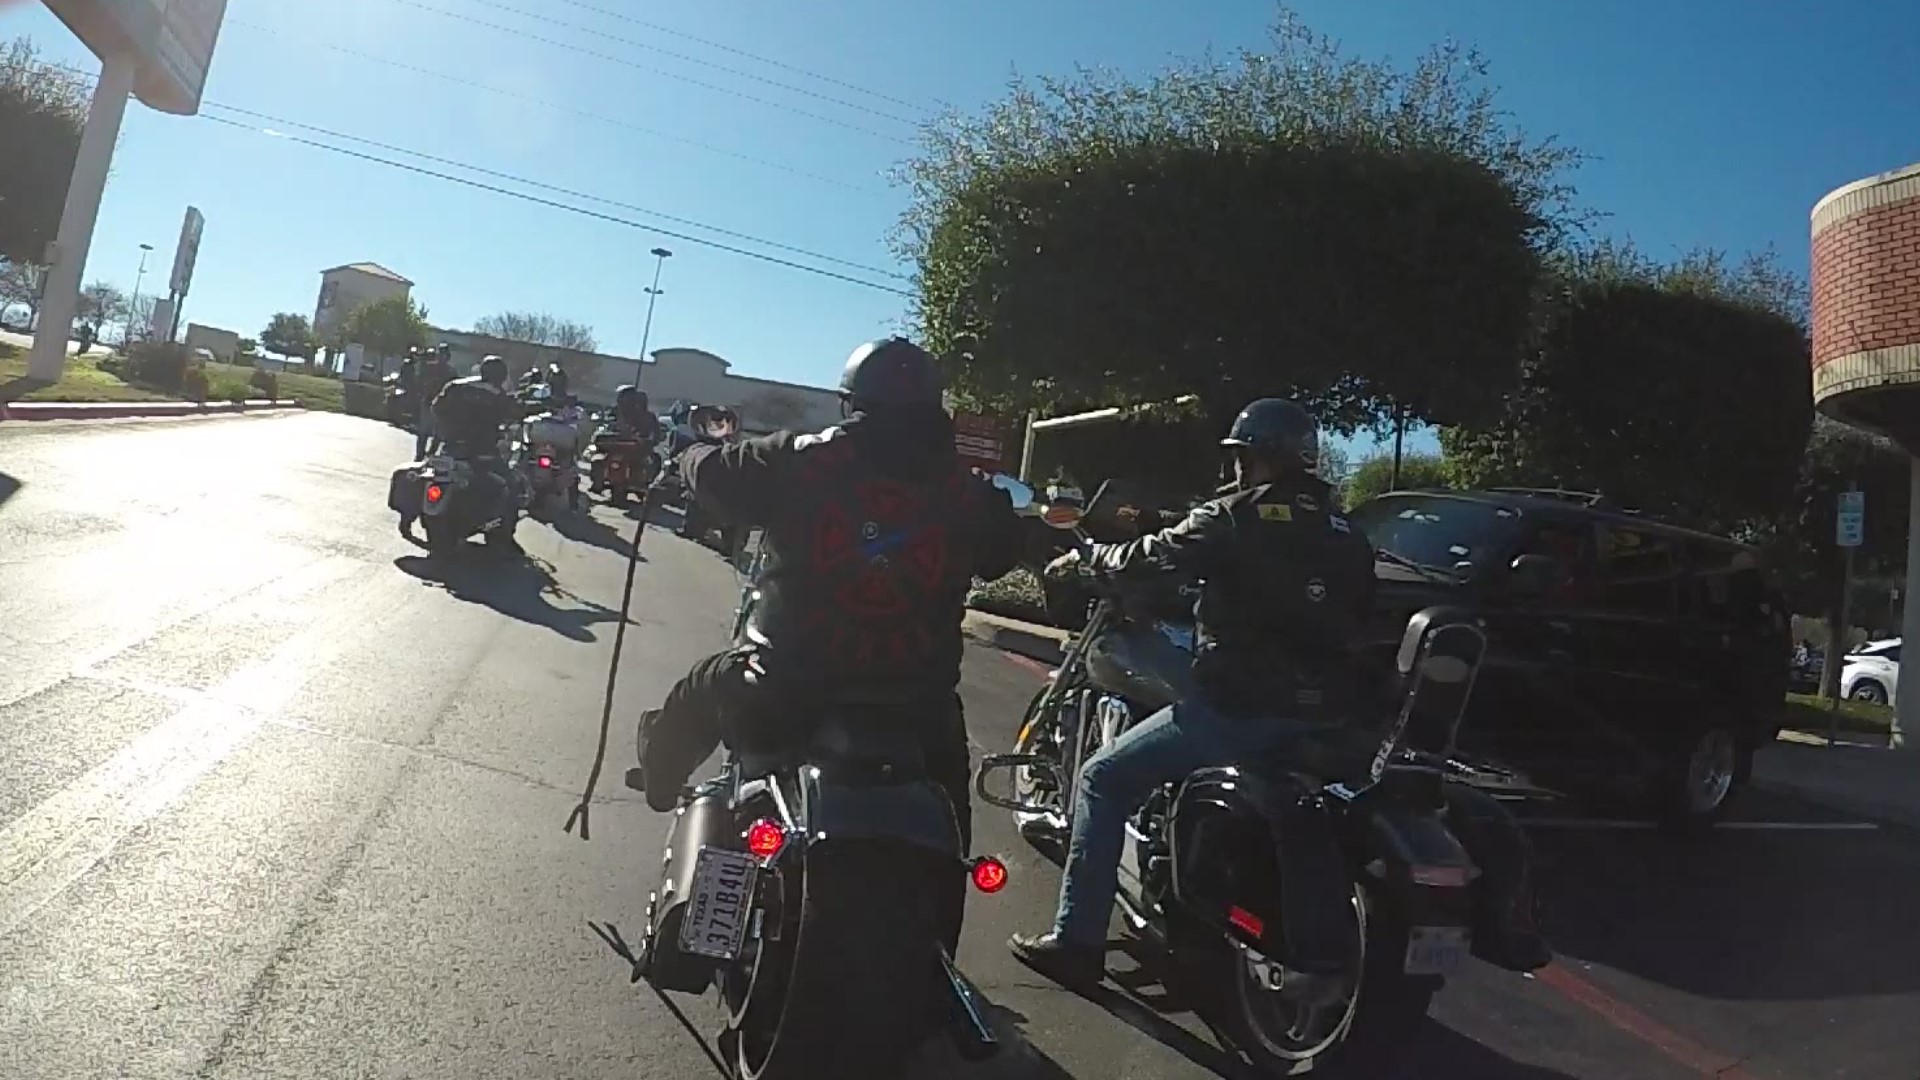 KVUE put a GoPro on one of the motorcycles to capture the in-the-moment feeling of the ride.